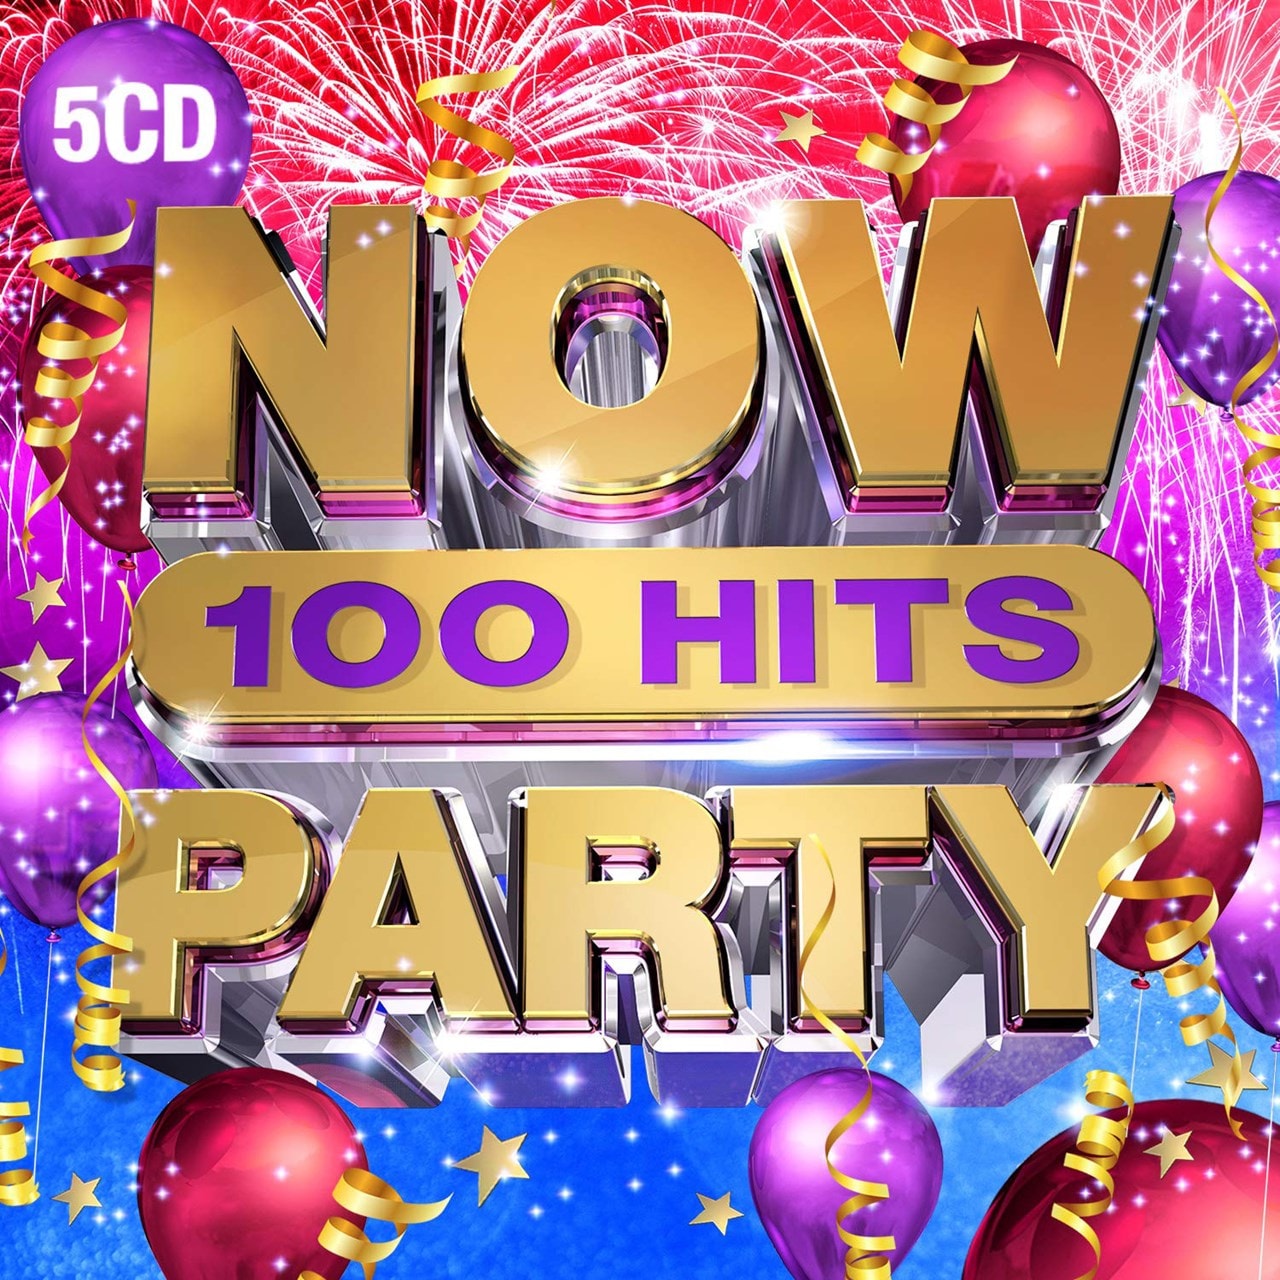 Now 100 Hits Party CD Box Set Free shipping over £20 HMV Store